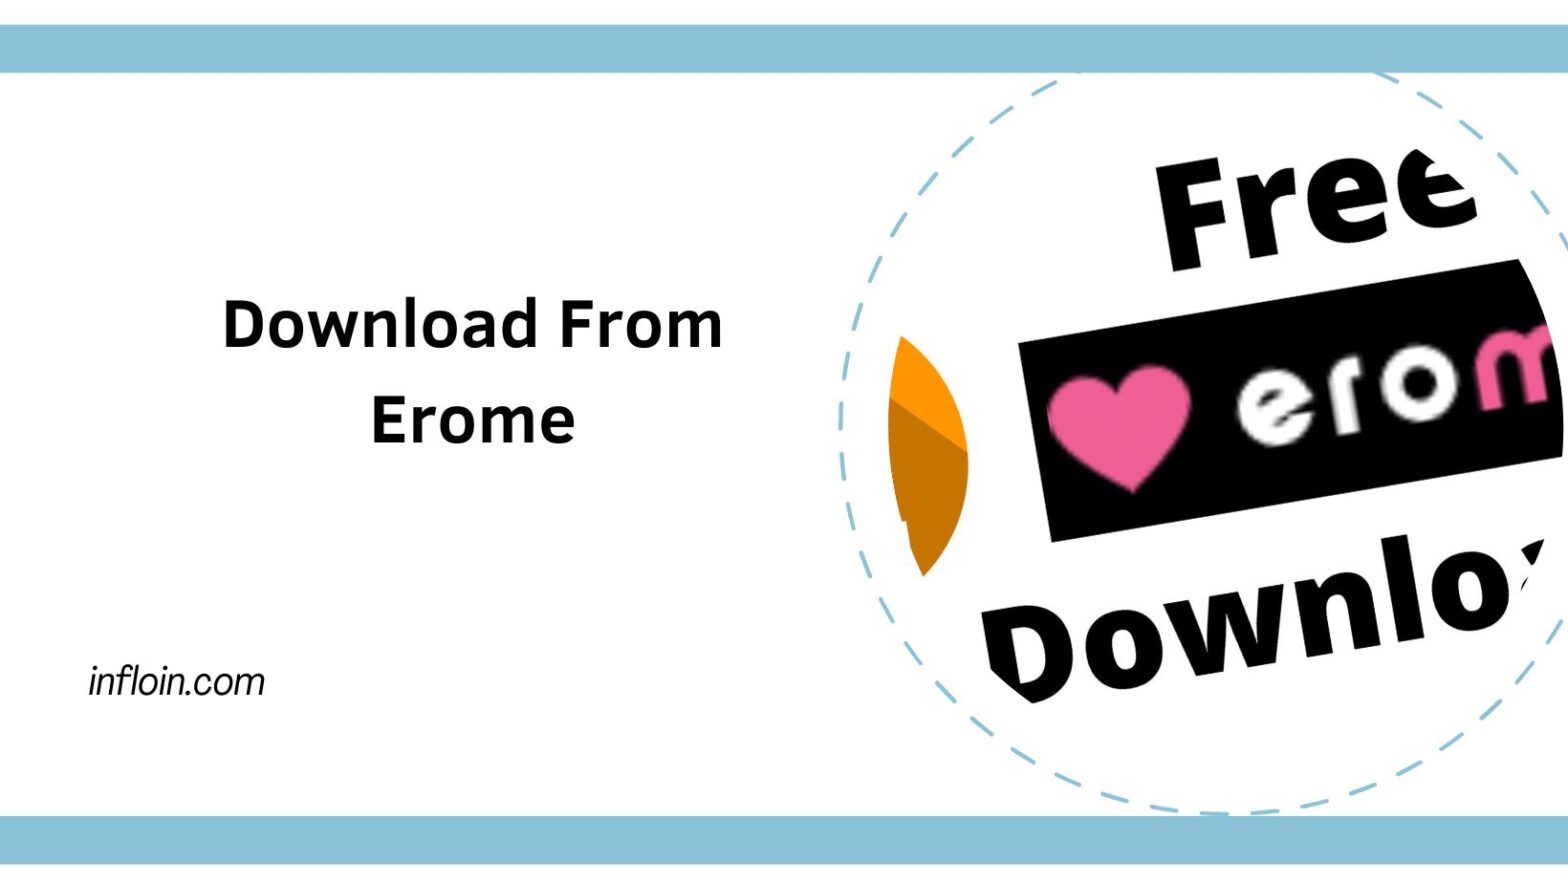 Download From Erome